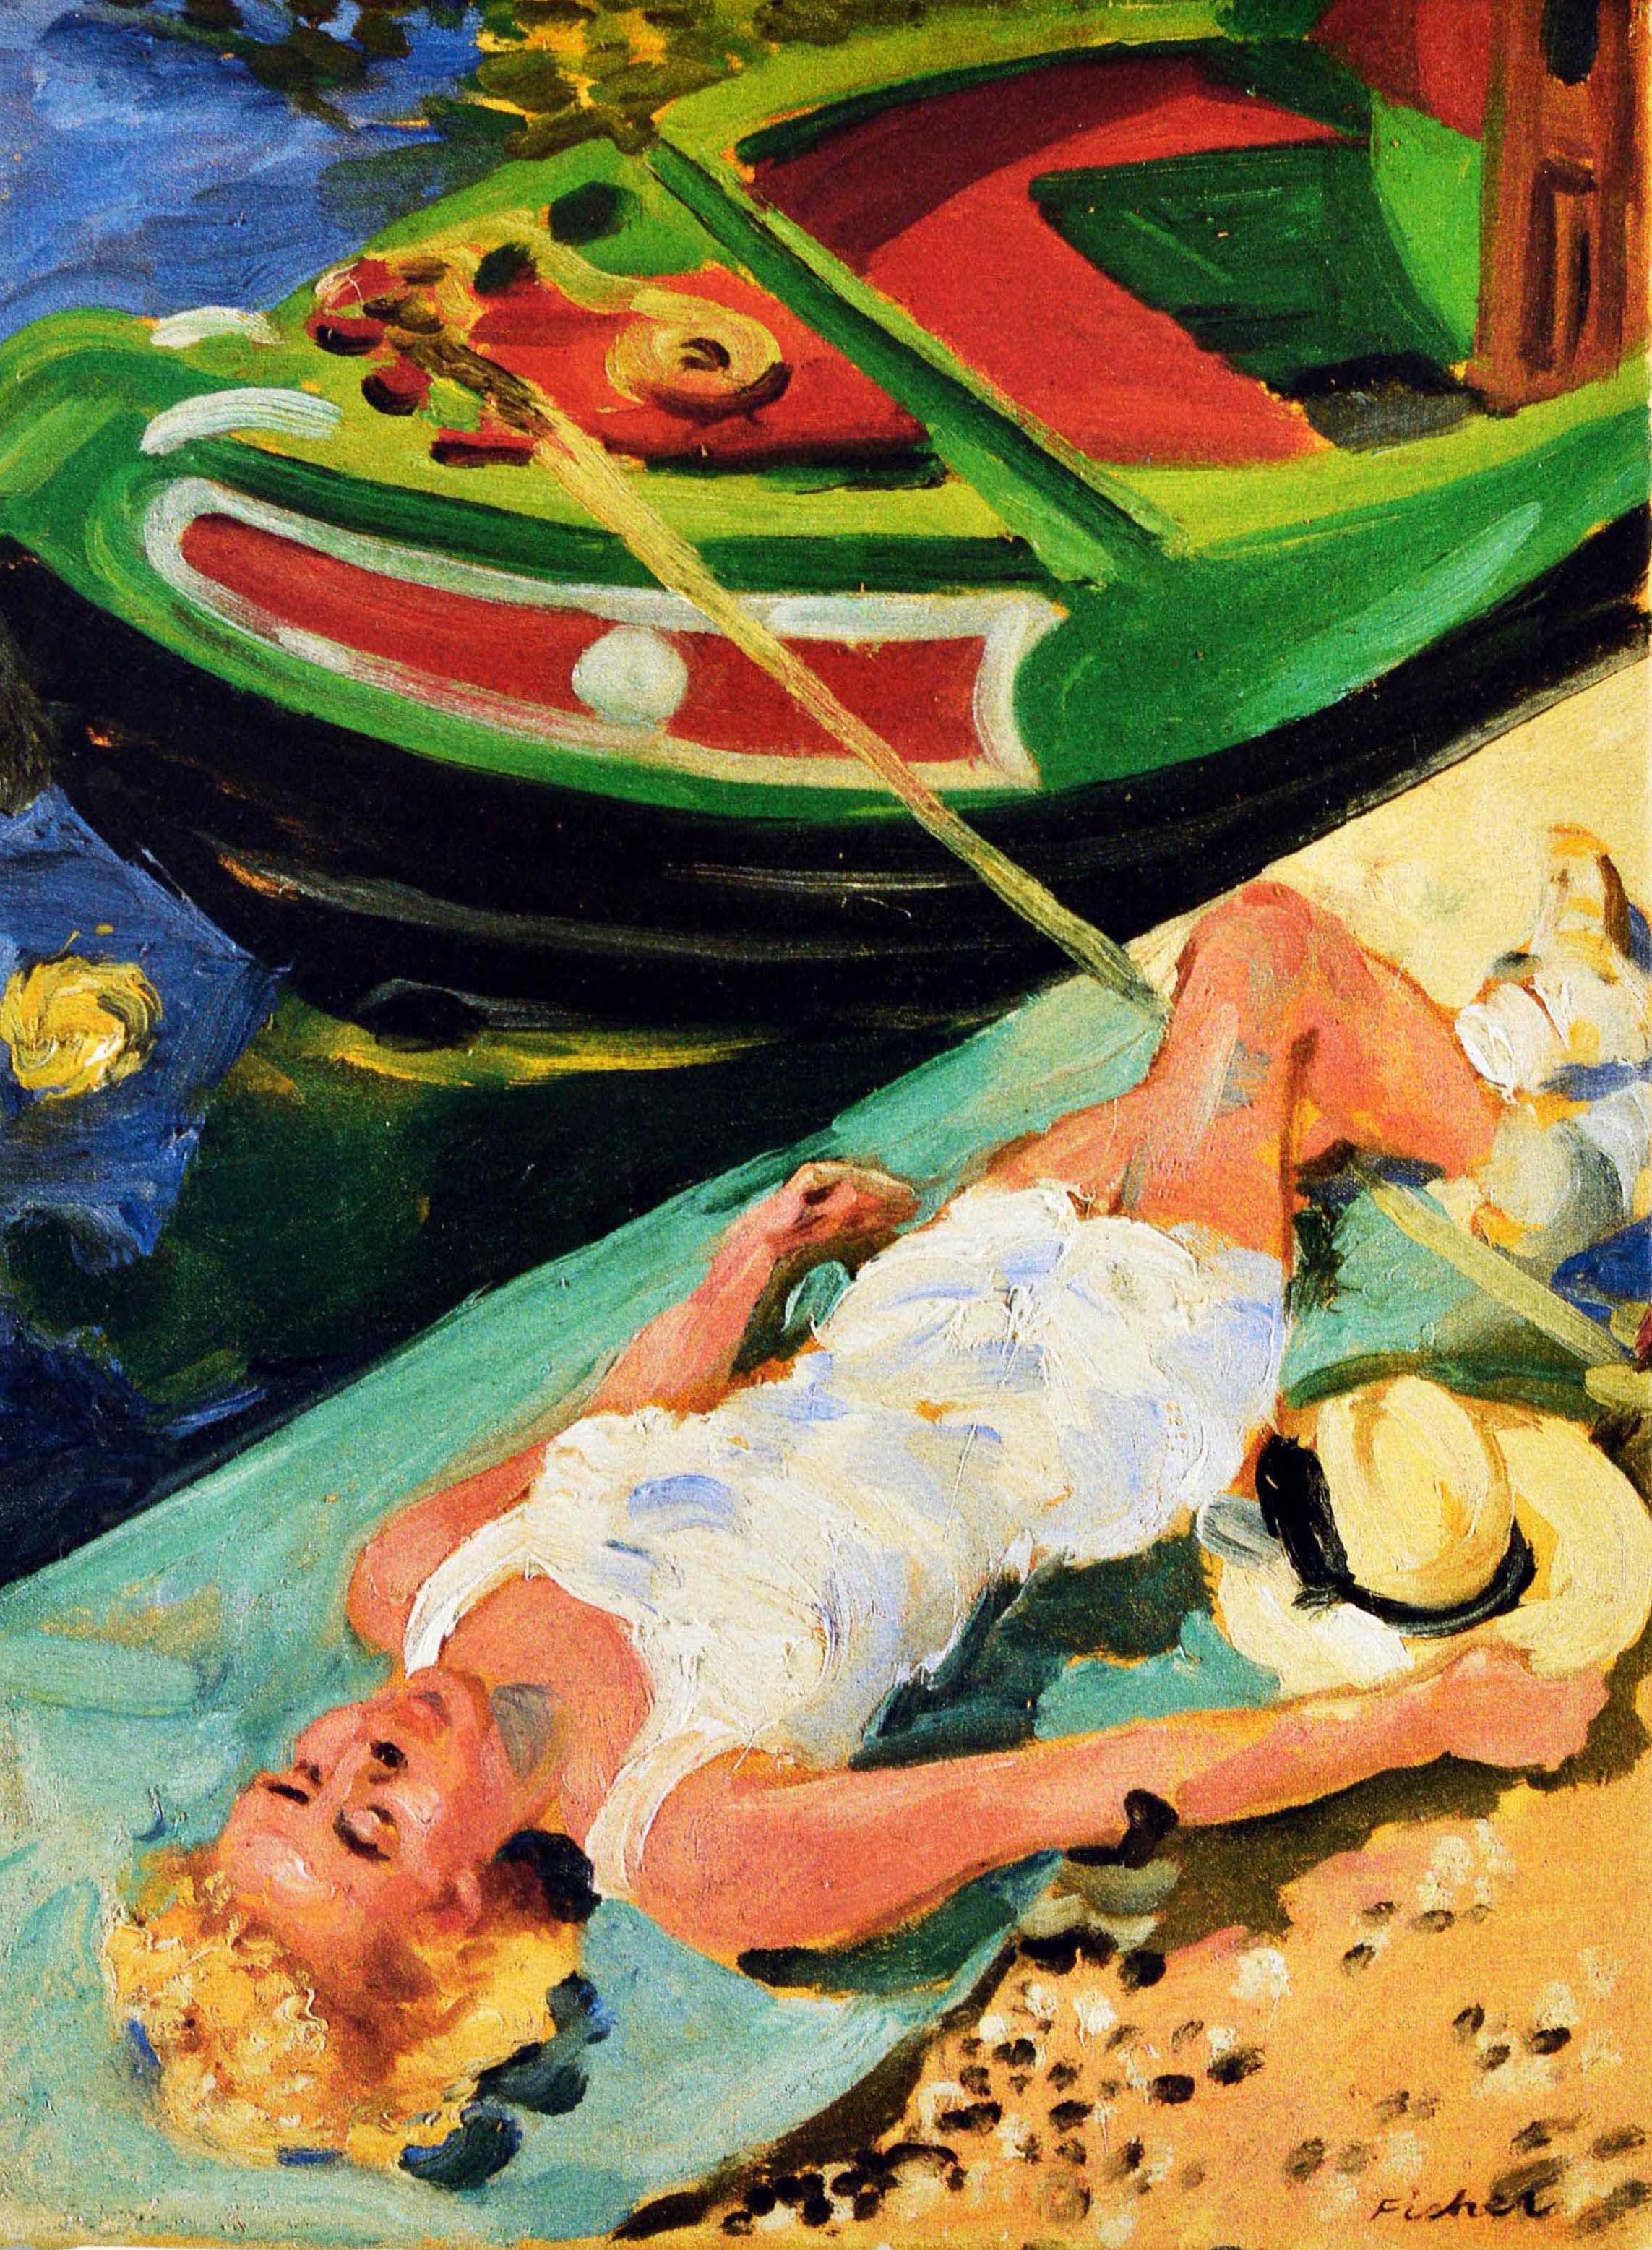 Original vintage London Underground poster - Lazy days, by tube at Little Venice. Nearest station: Warwick Avenue. Great image featuring a lady wearing a white outfit and holding a sun hat lying down sunbathing next to a canal boat on the water.